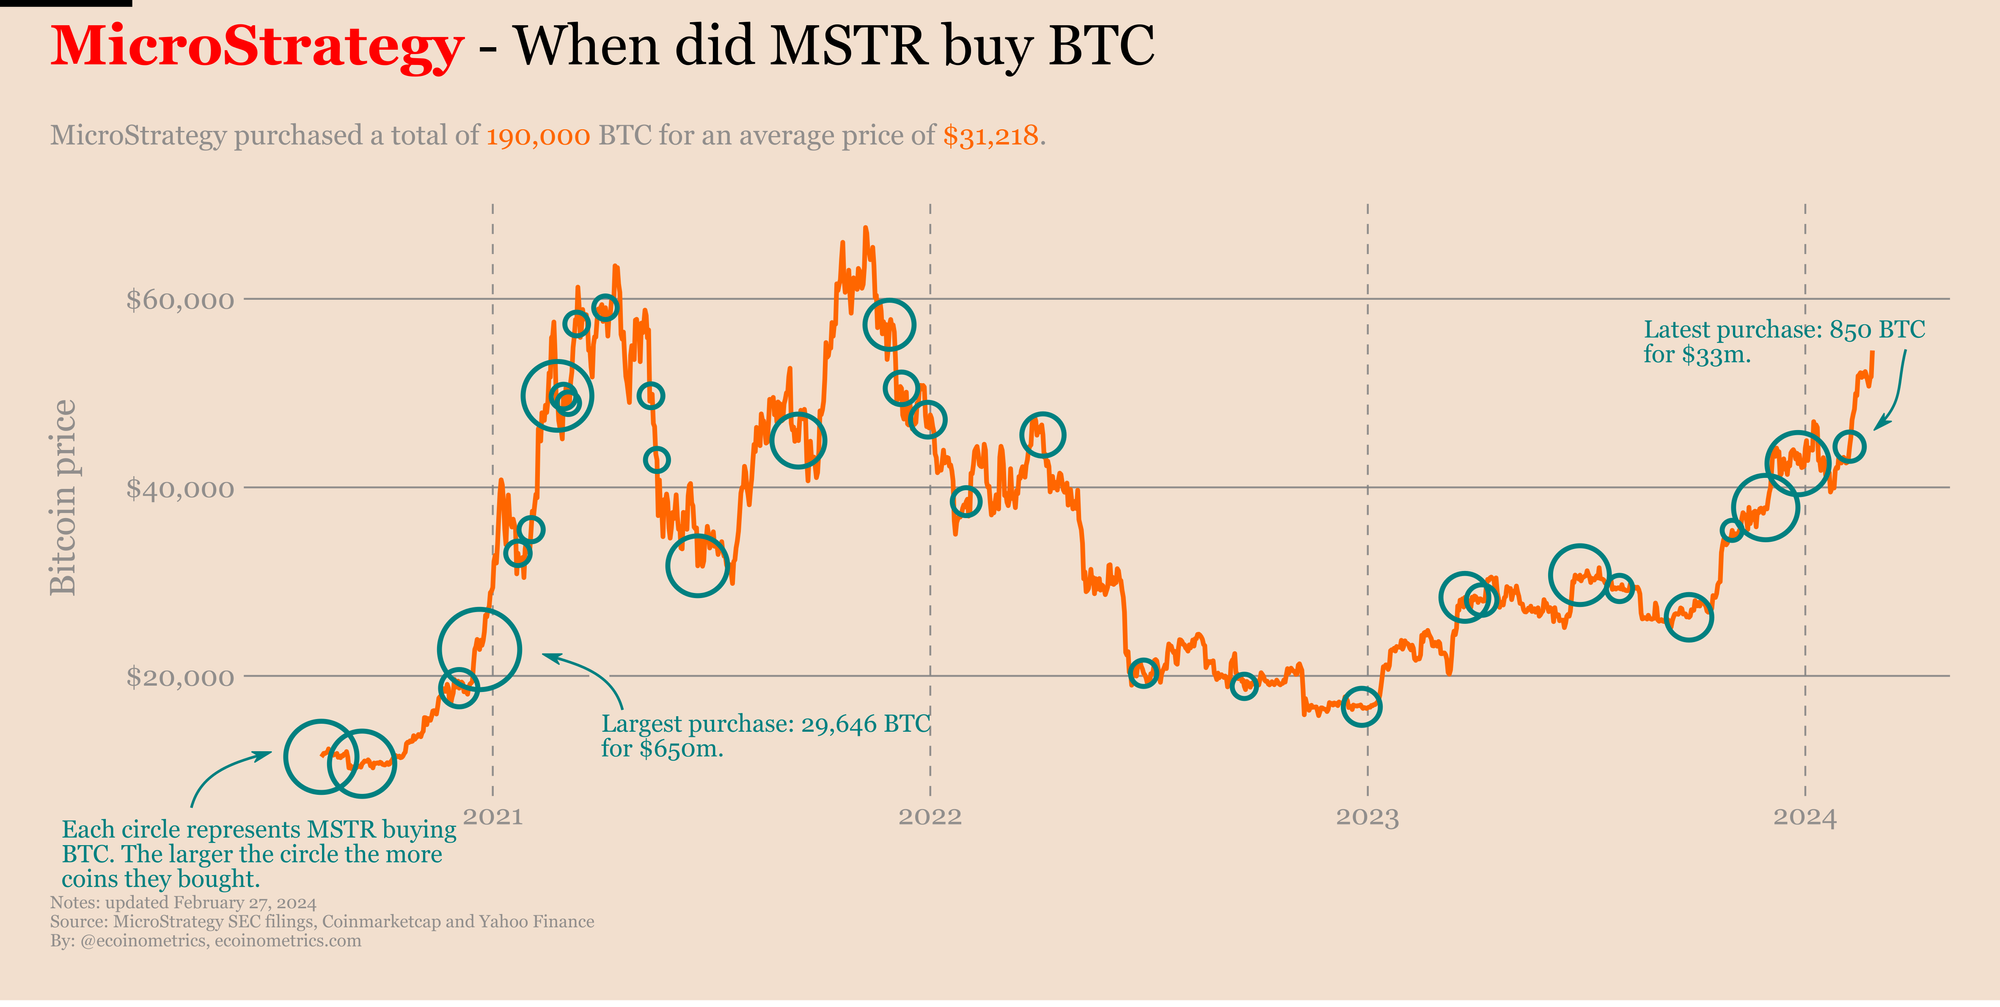 How much did MicroStrategy pay for Bitcoin?